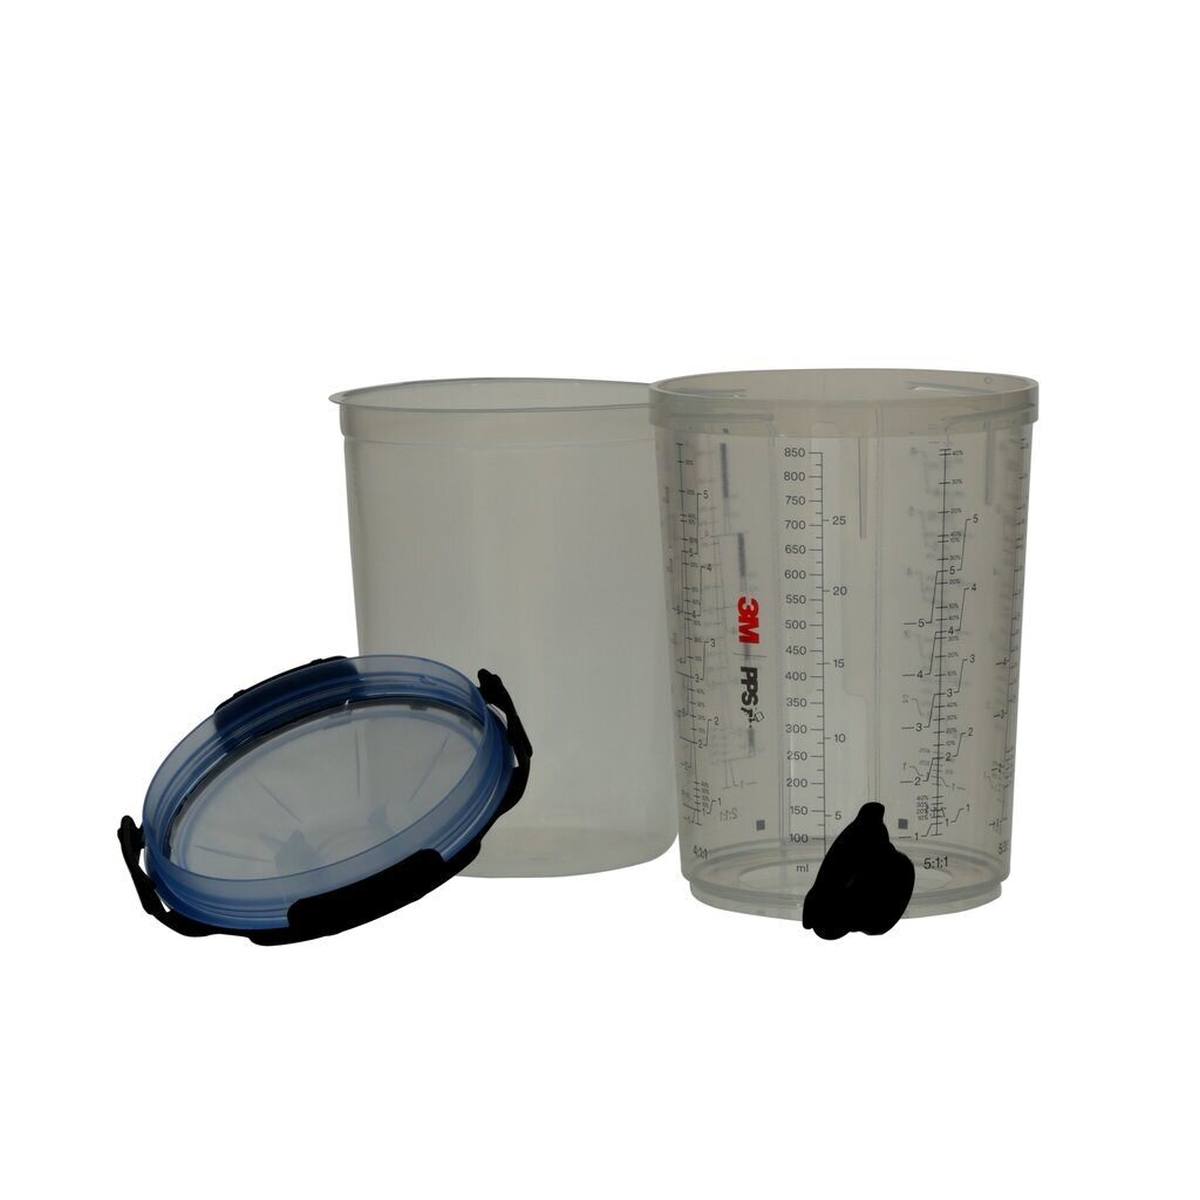 3M PPS Series 2.0 set, large, 850 ml, 125Î¼ filter, 50 inner cups / 50 lids / 32 sealing caps / 1 outer cup #26740